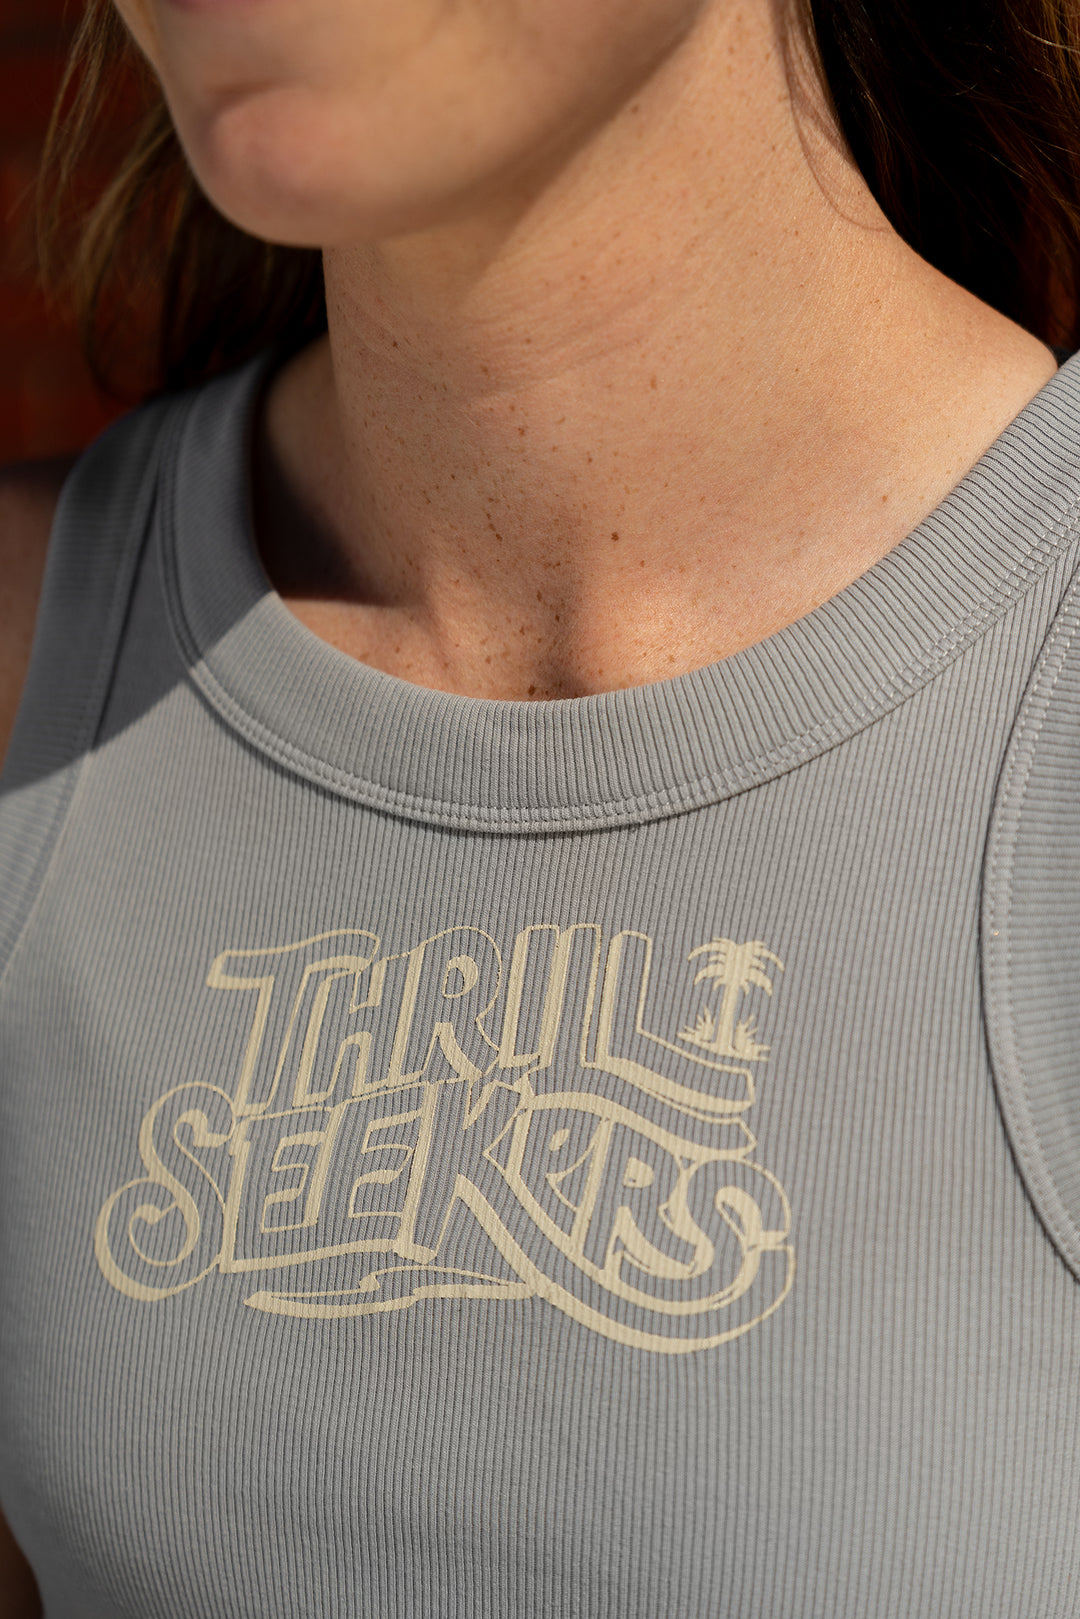 Thrill Seekers Babes Coaster Crop Tank - Storm